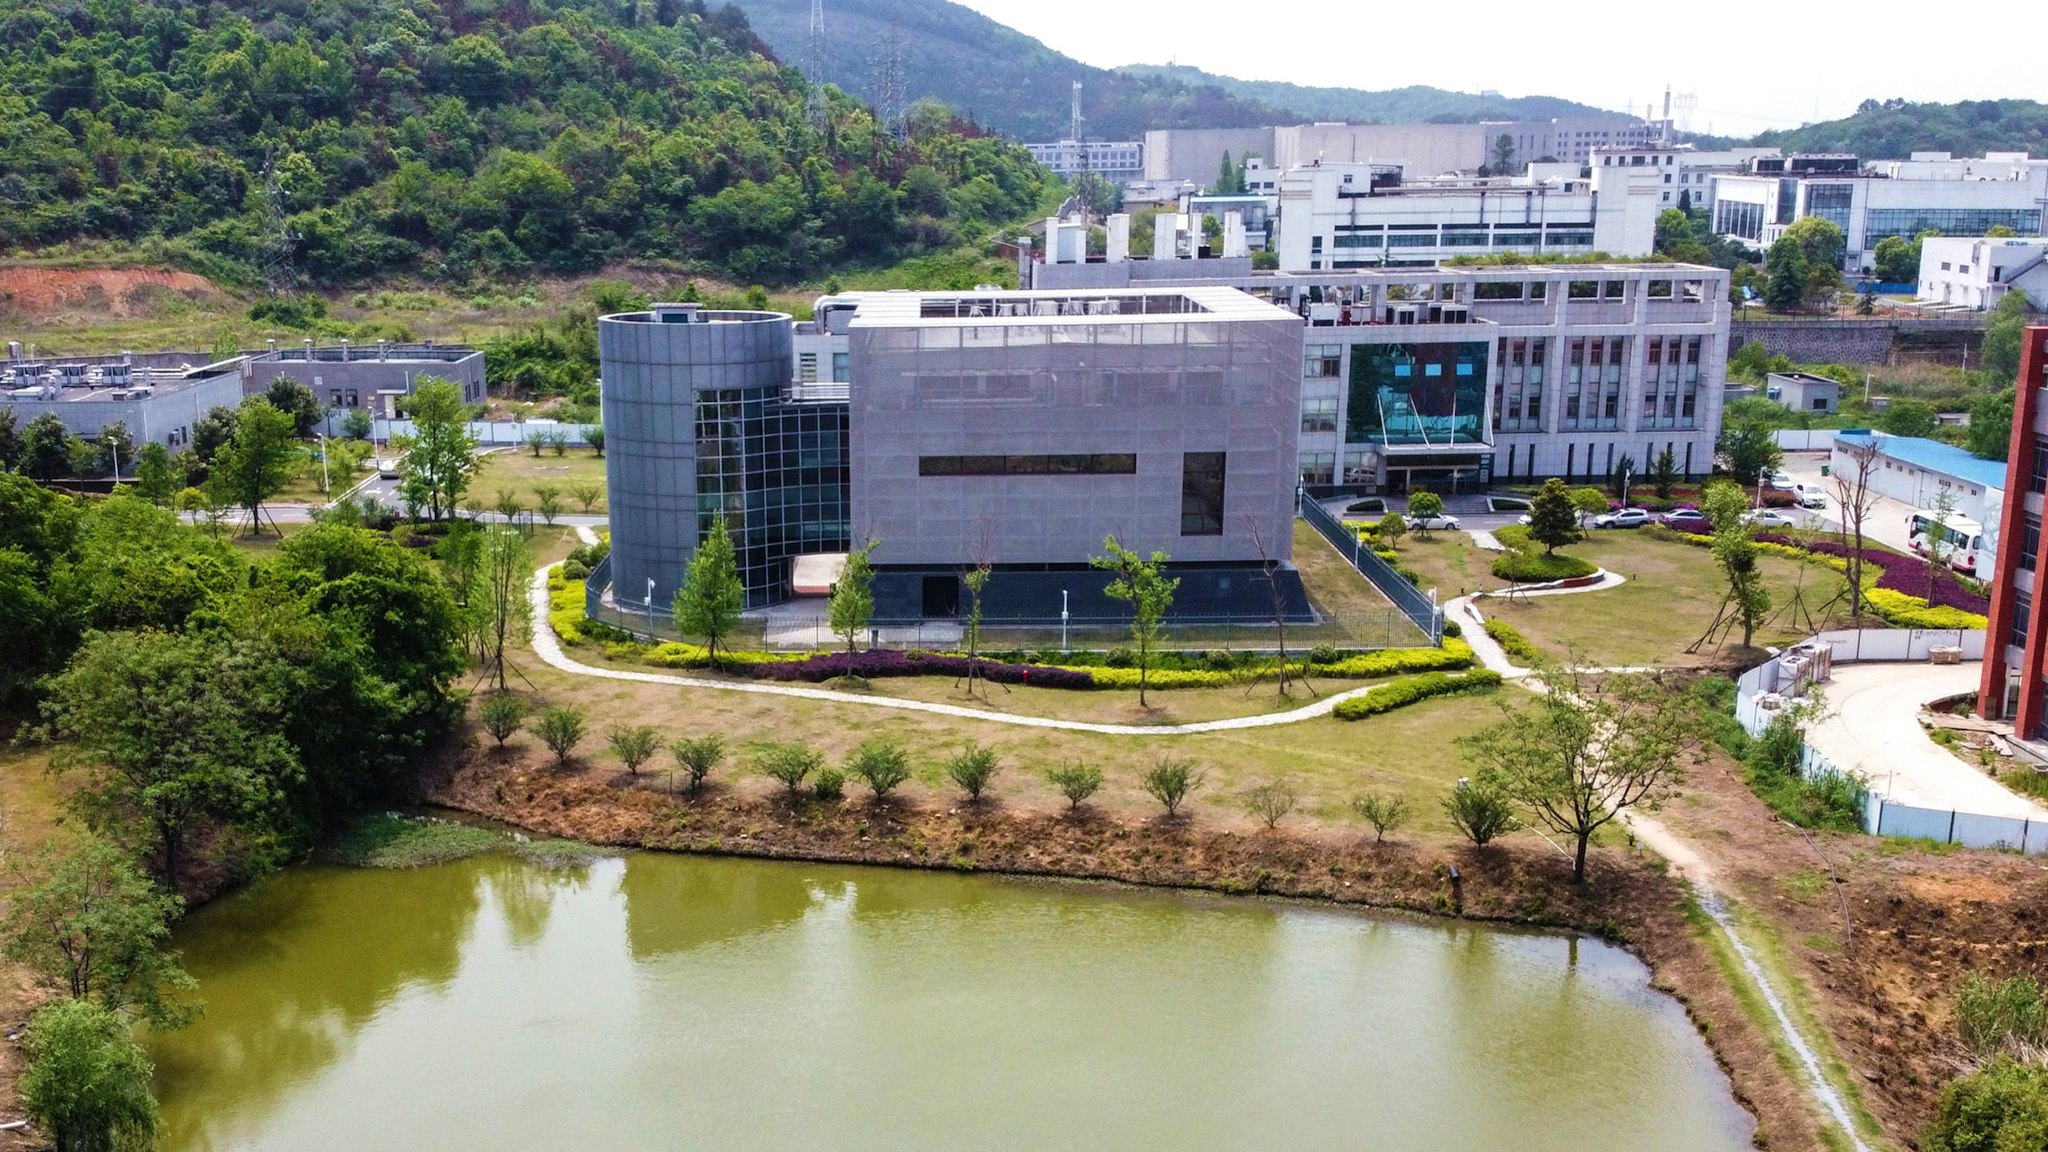 An aerial view shows the P4 laboratory (C) at the Wuhan Institute of Virology in Wuhan in China's central Hubei province on April 17, 2020. - The P4 epidemiological laboratory was built in co-operation with French bio-industrial firm Institut Merieux and the Chinese Academy of Sciences. The facility is among a handful of labs around the world cleared to handle Class 4 pathogens (P4) - dangerous viruses that pose a high risk of person-to-person transmission.